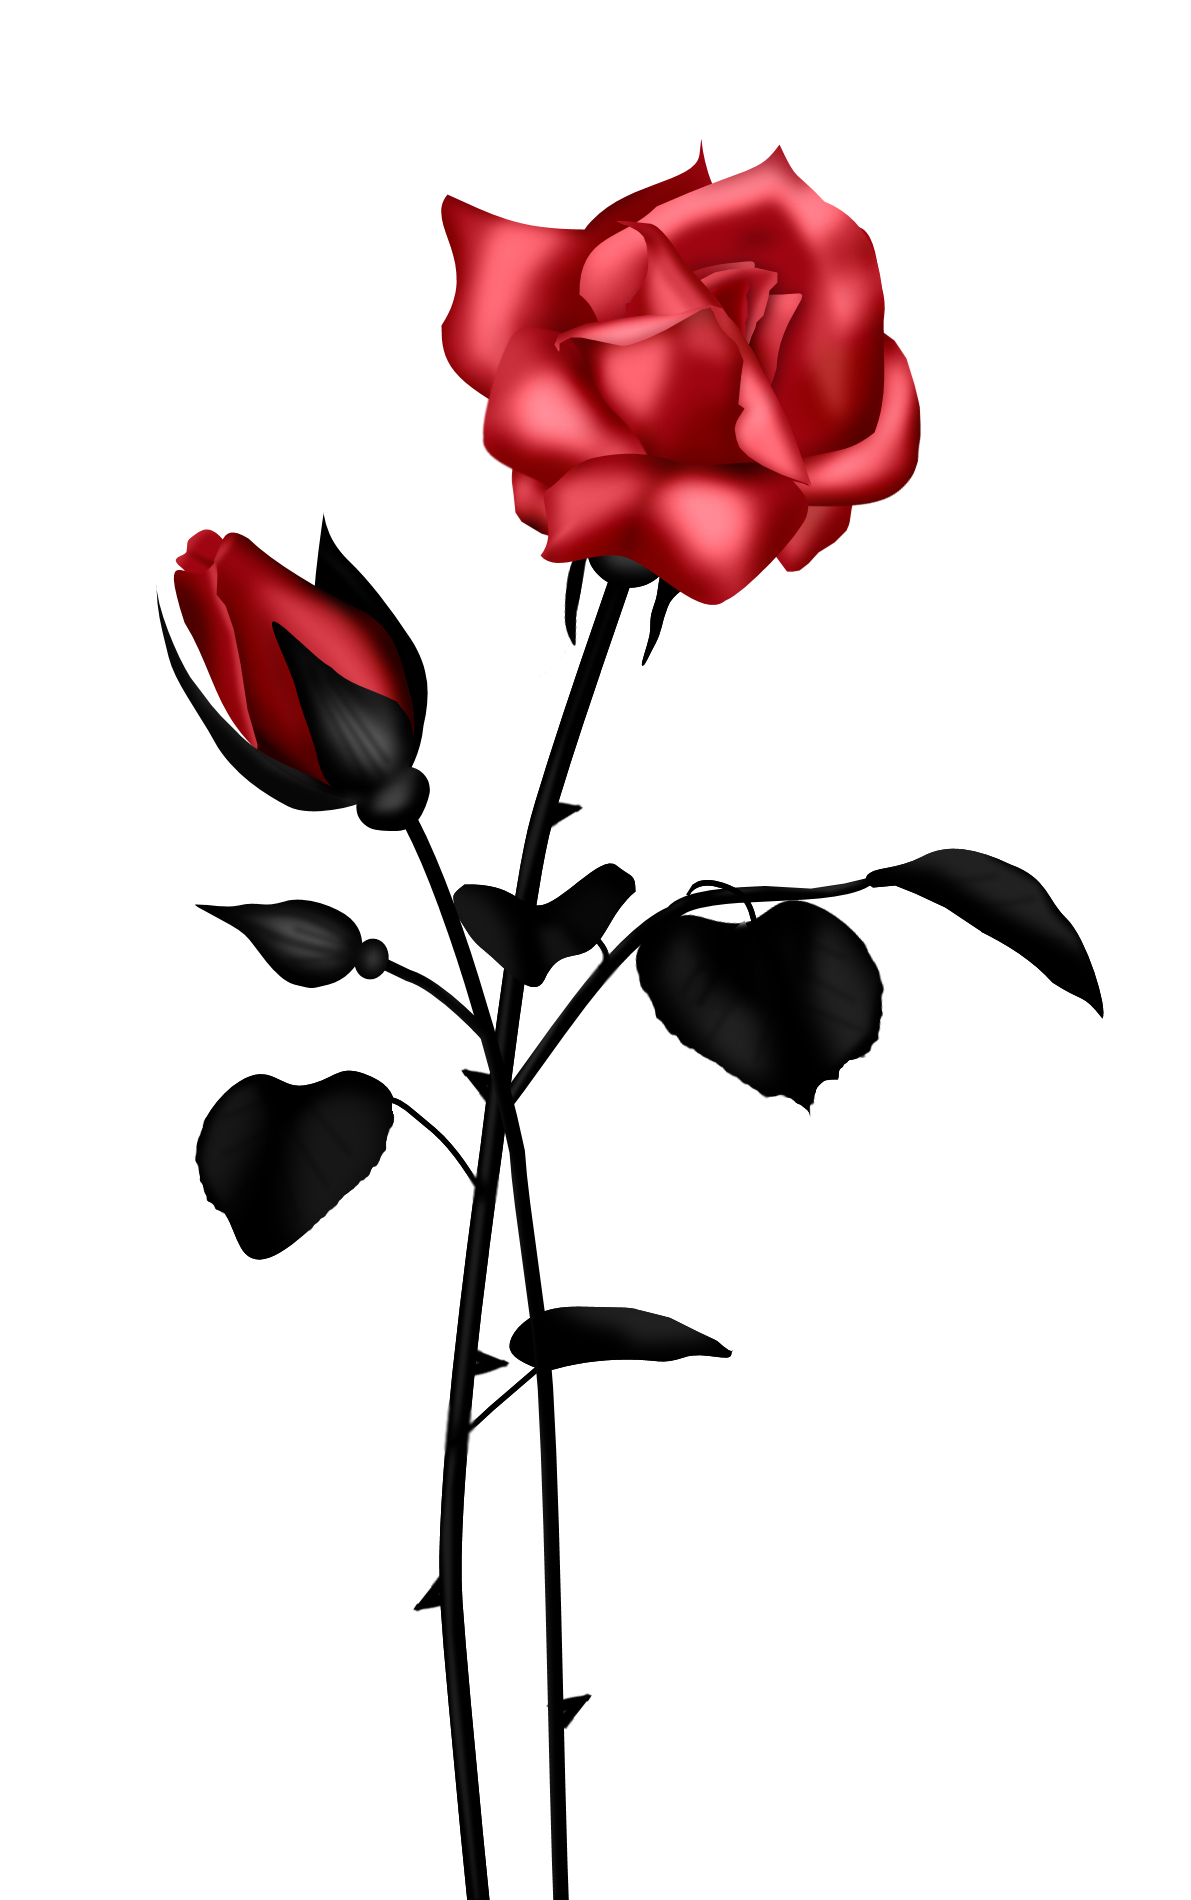 Red Rose / Png - ClipArt Best